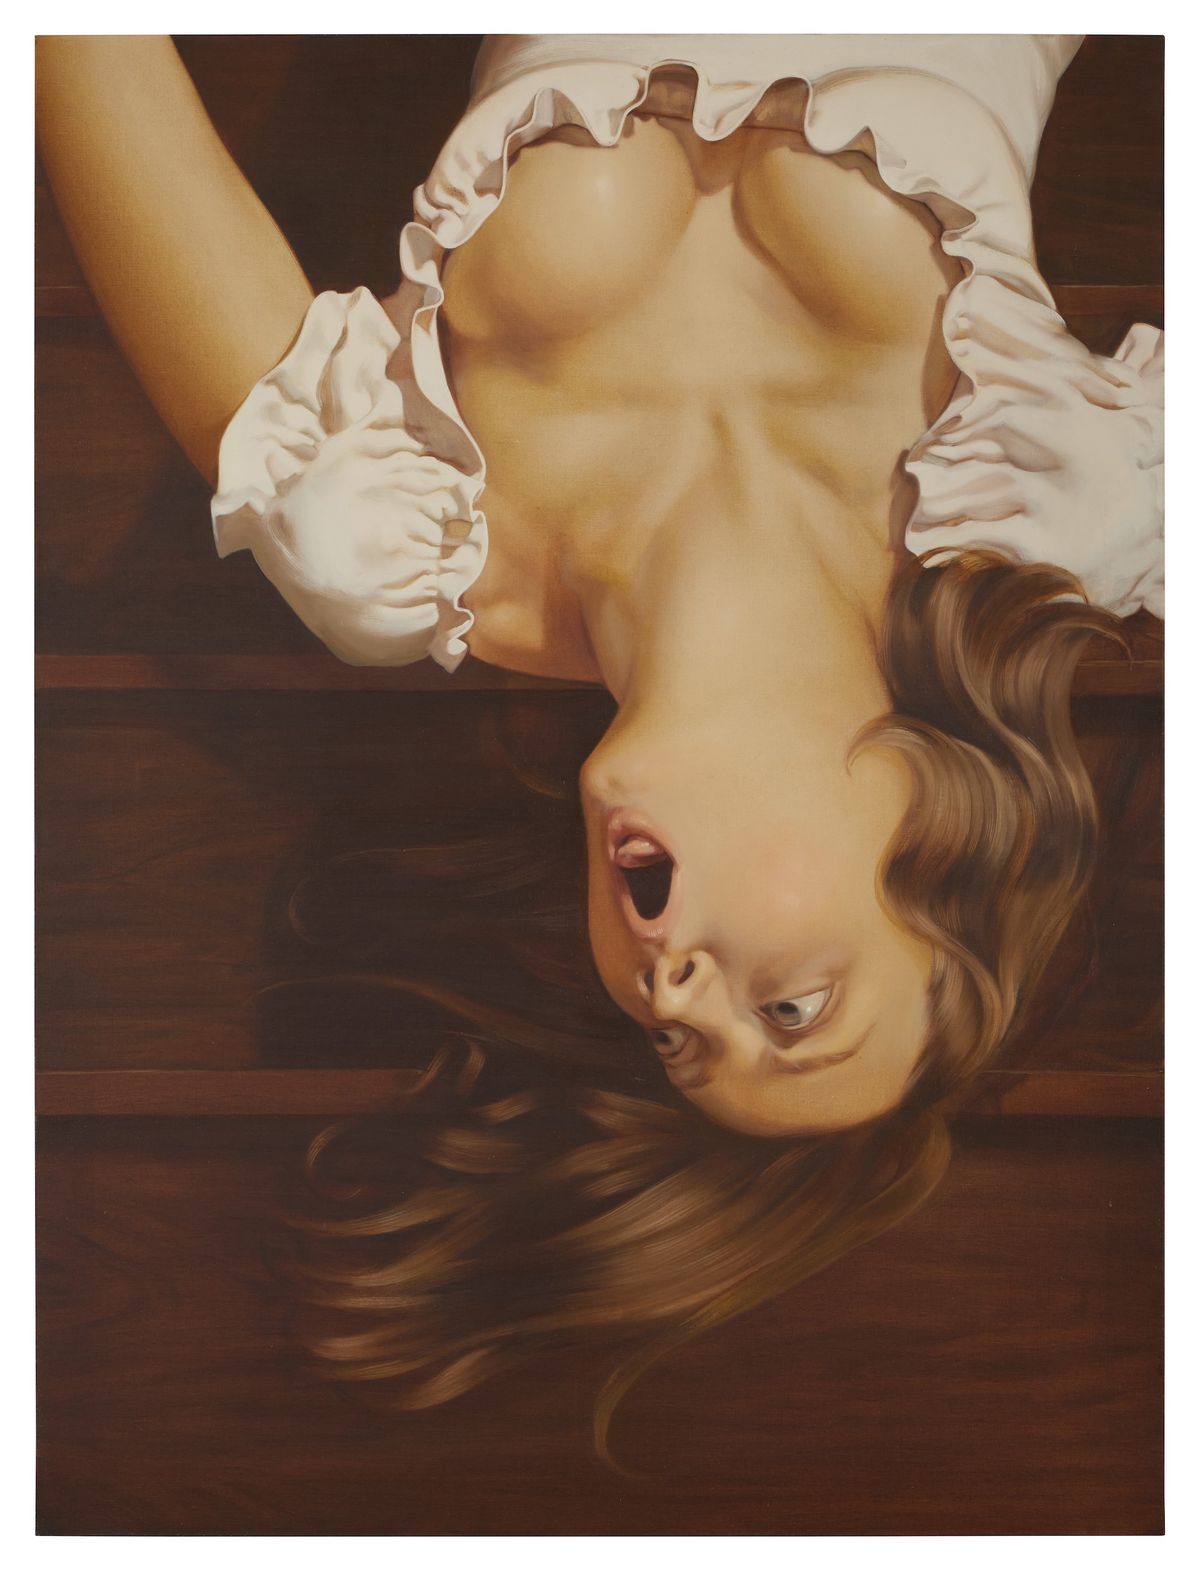 Anna Weyant, Falling Woman, 2020 Courtesy Sotheby's